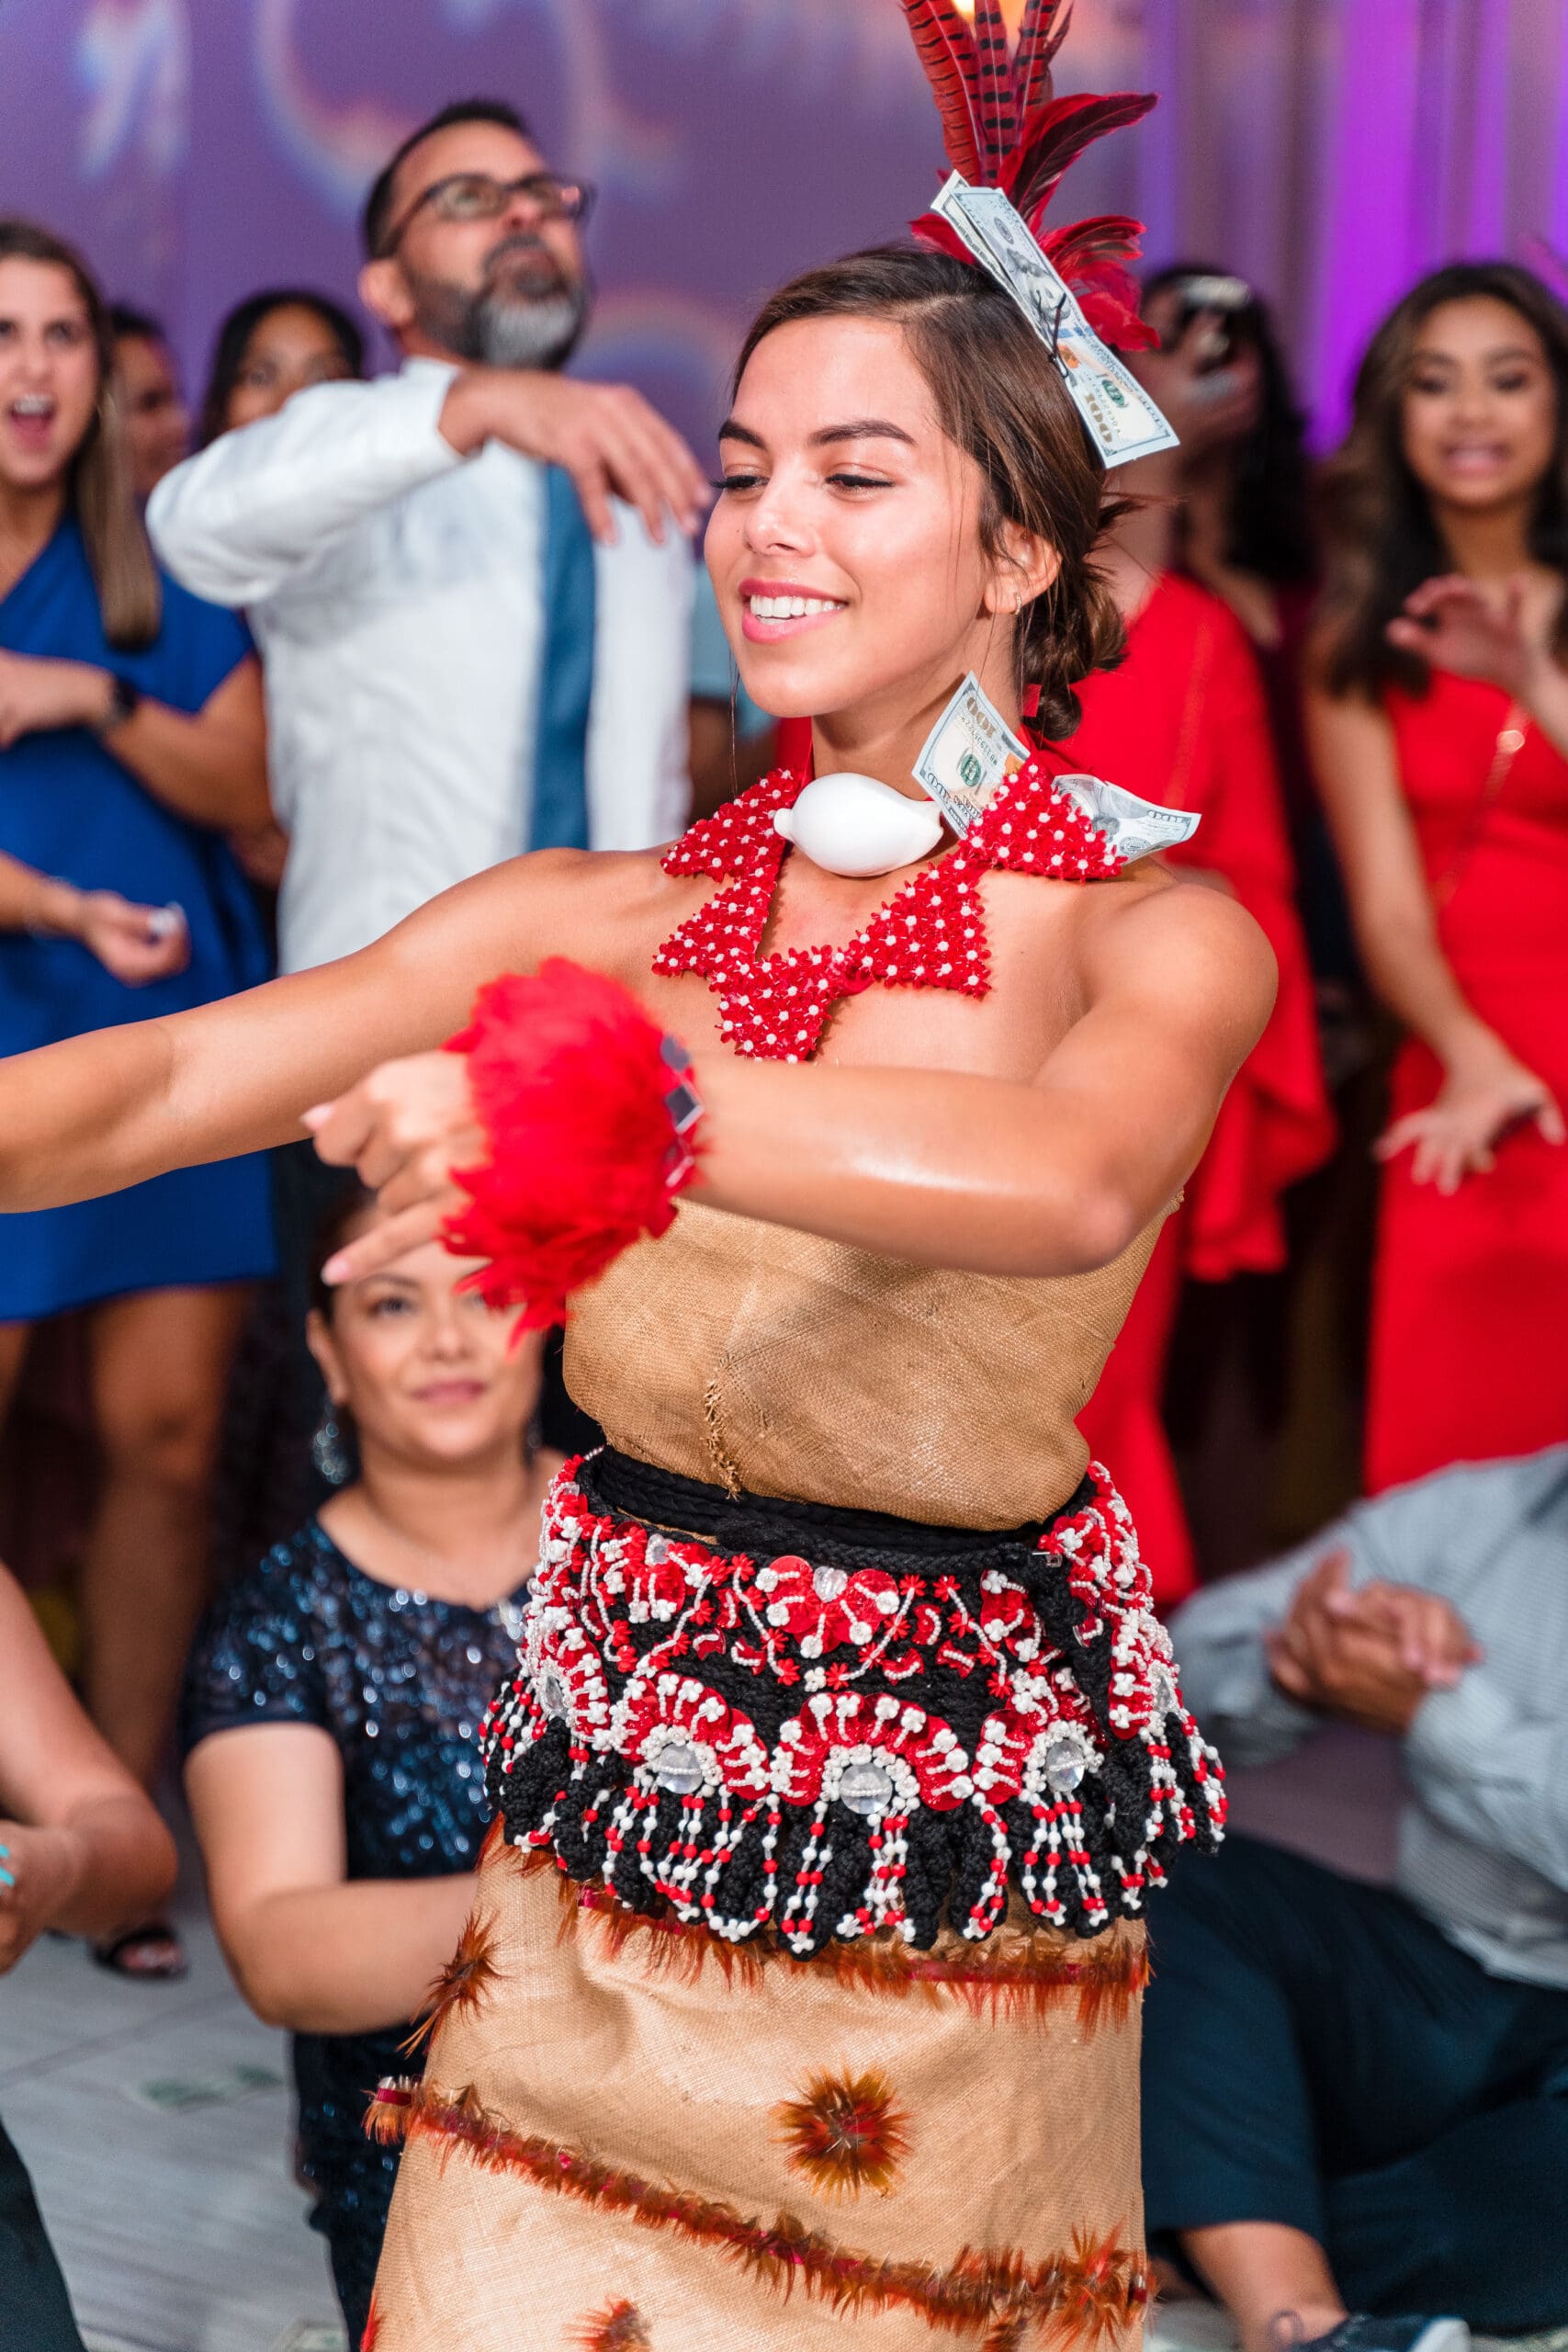 Wife in traditional Hawaiian wedding attire amidst smiling guests throwing money in celebration, with Jerzy Nieves Photography capturing the joyful moment.